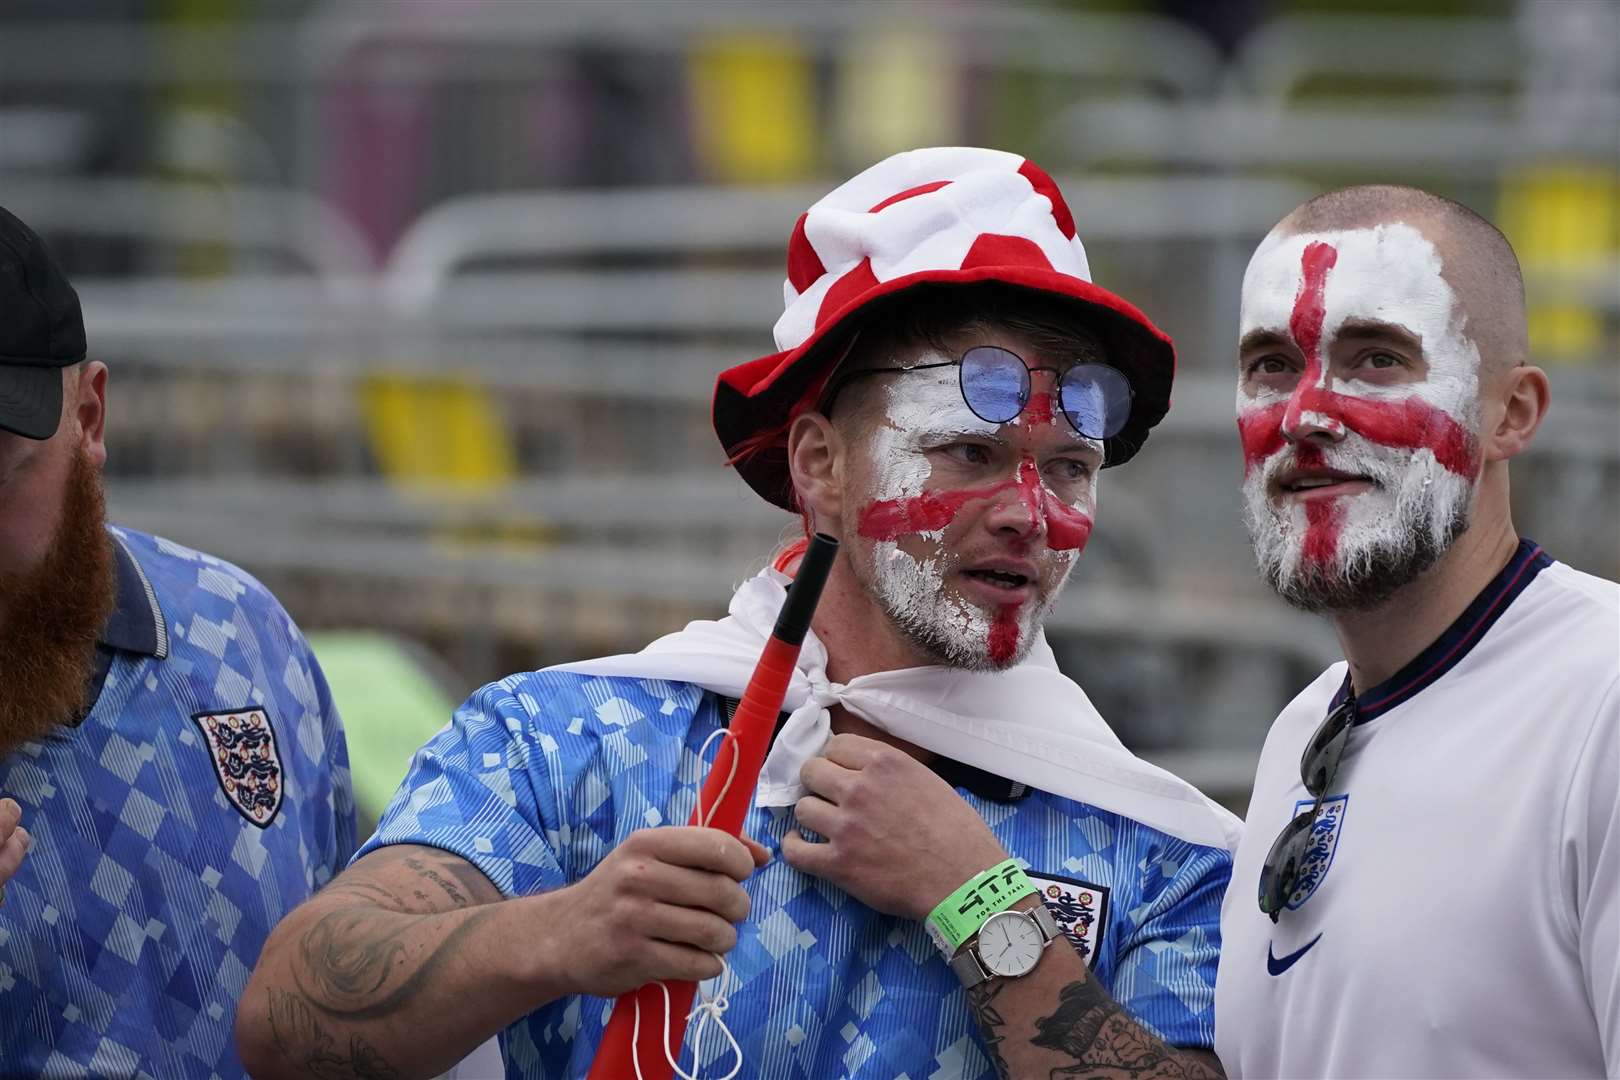 Fans arrive at Wembley for the big match (Peter Byrne/PA)